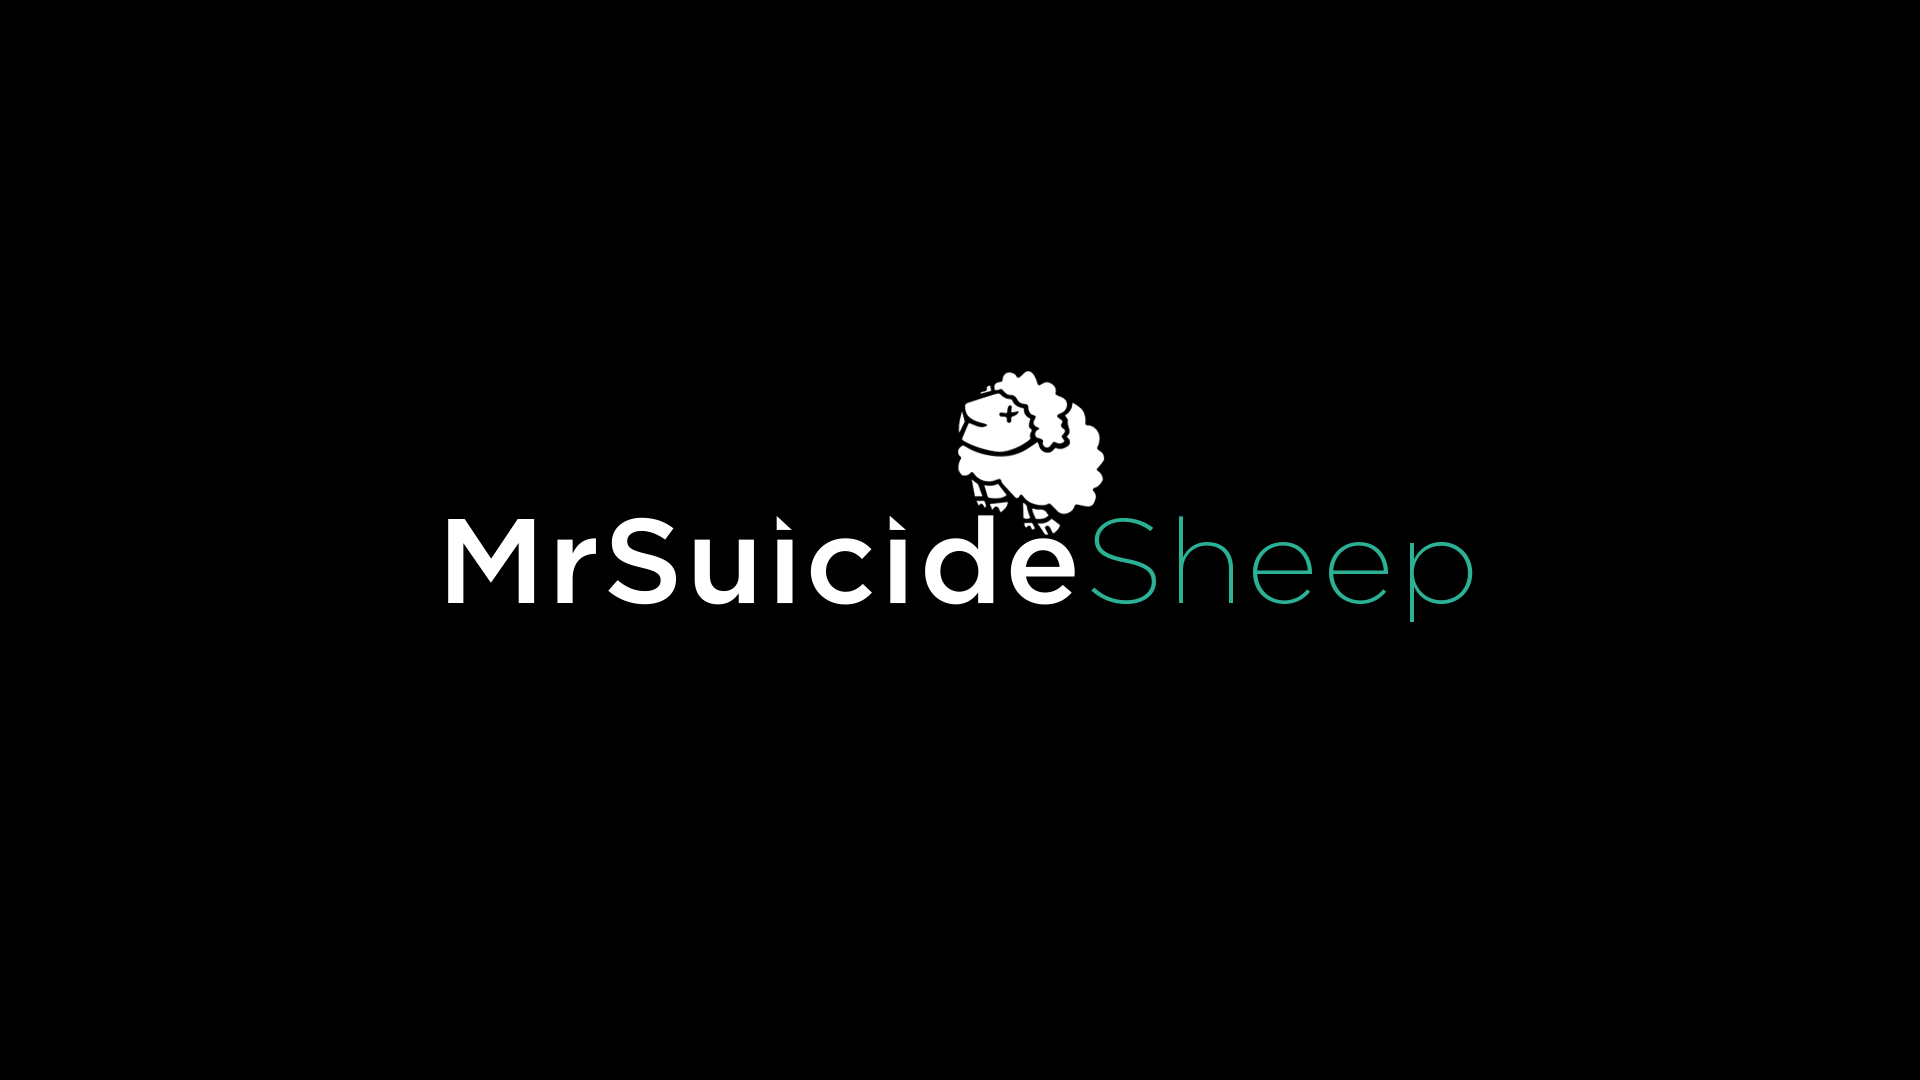 Suicide Sheep Text Minimalism Black Background Simple Background 1920x1080